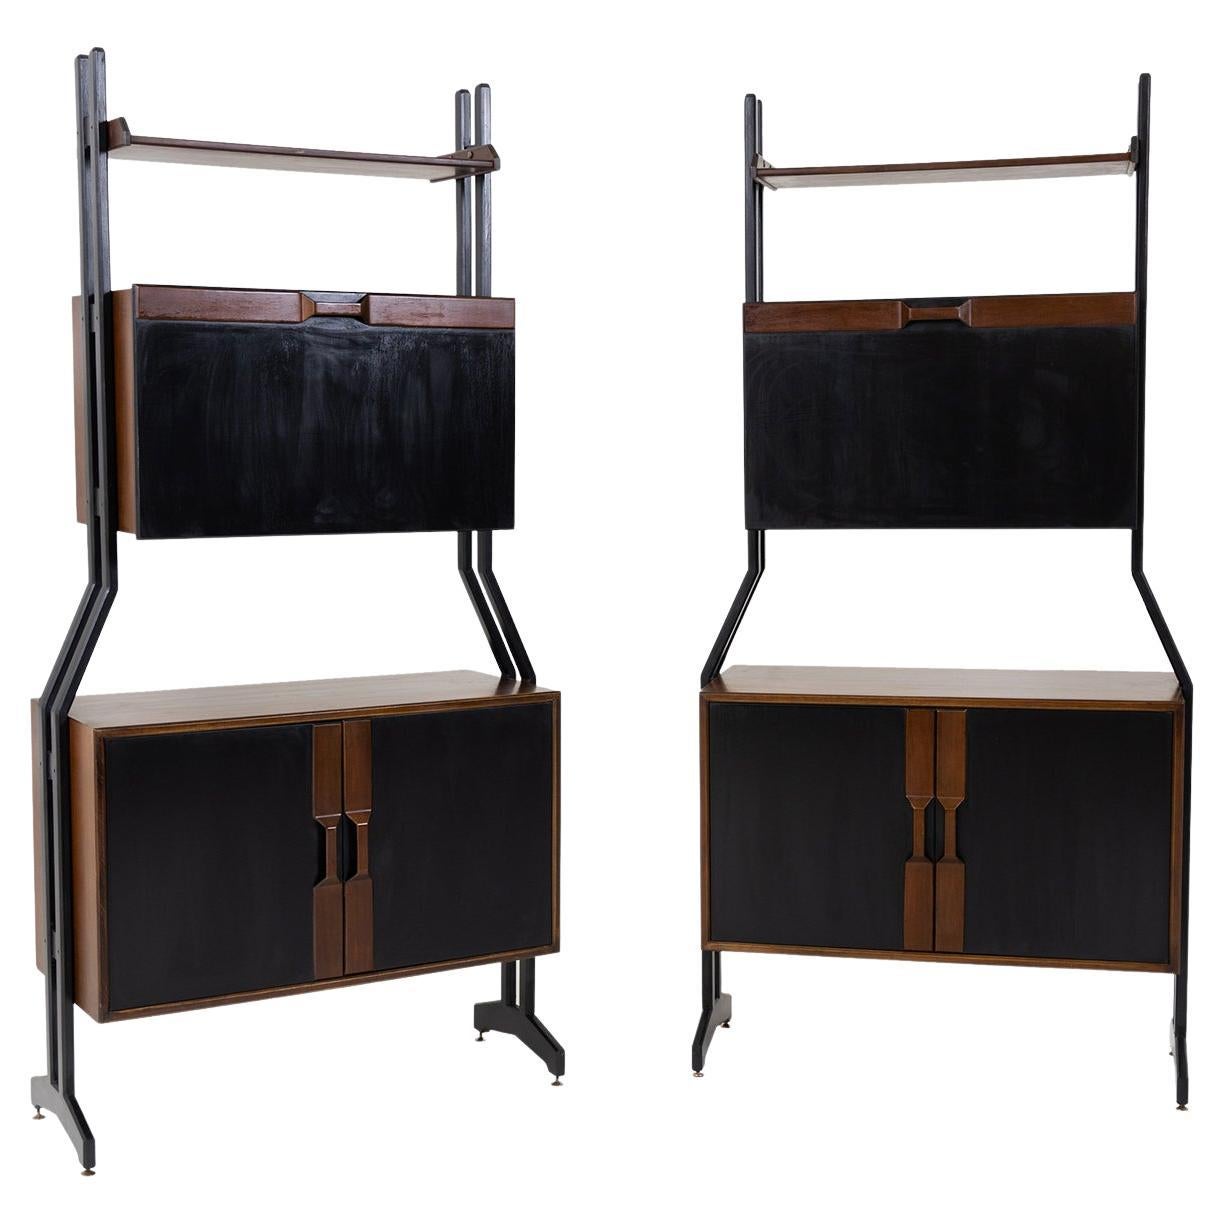 20th Century Italian Pair of Walnut Shelves, Rosewood Cabinets by Vittorio Dassi For Sale